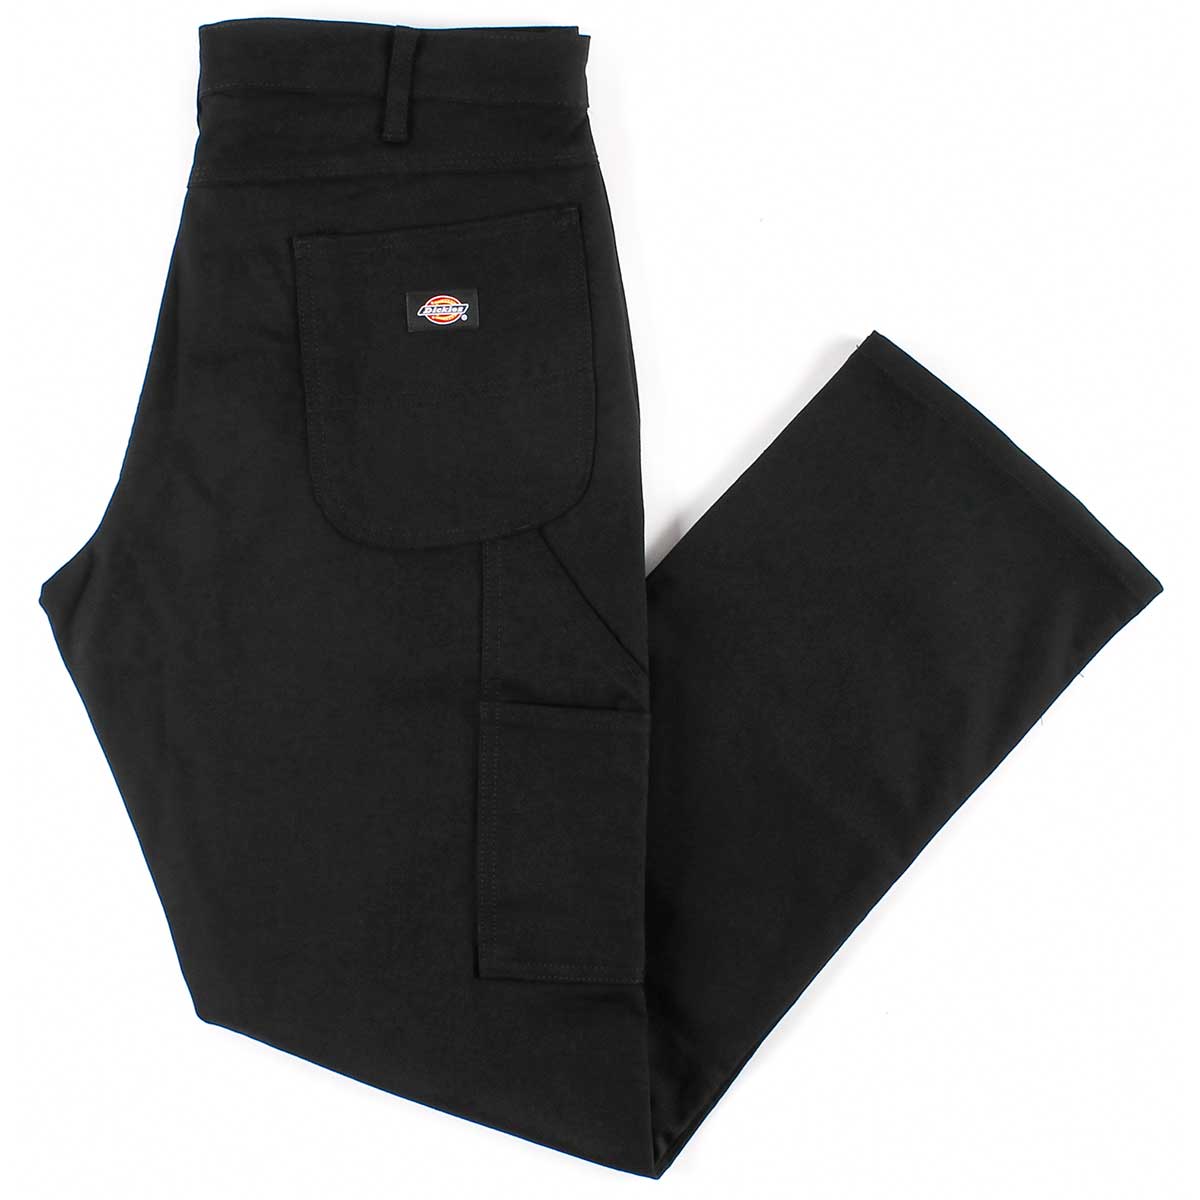 Dickies Relaxed Fit Carpenter Straight Leg Heavyweight Duck Pants - Frank's  Sports Shop